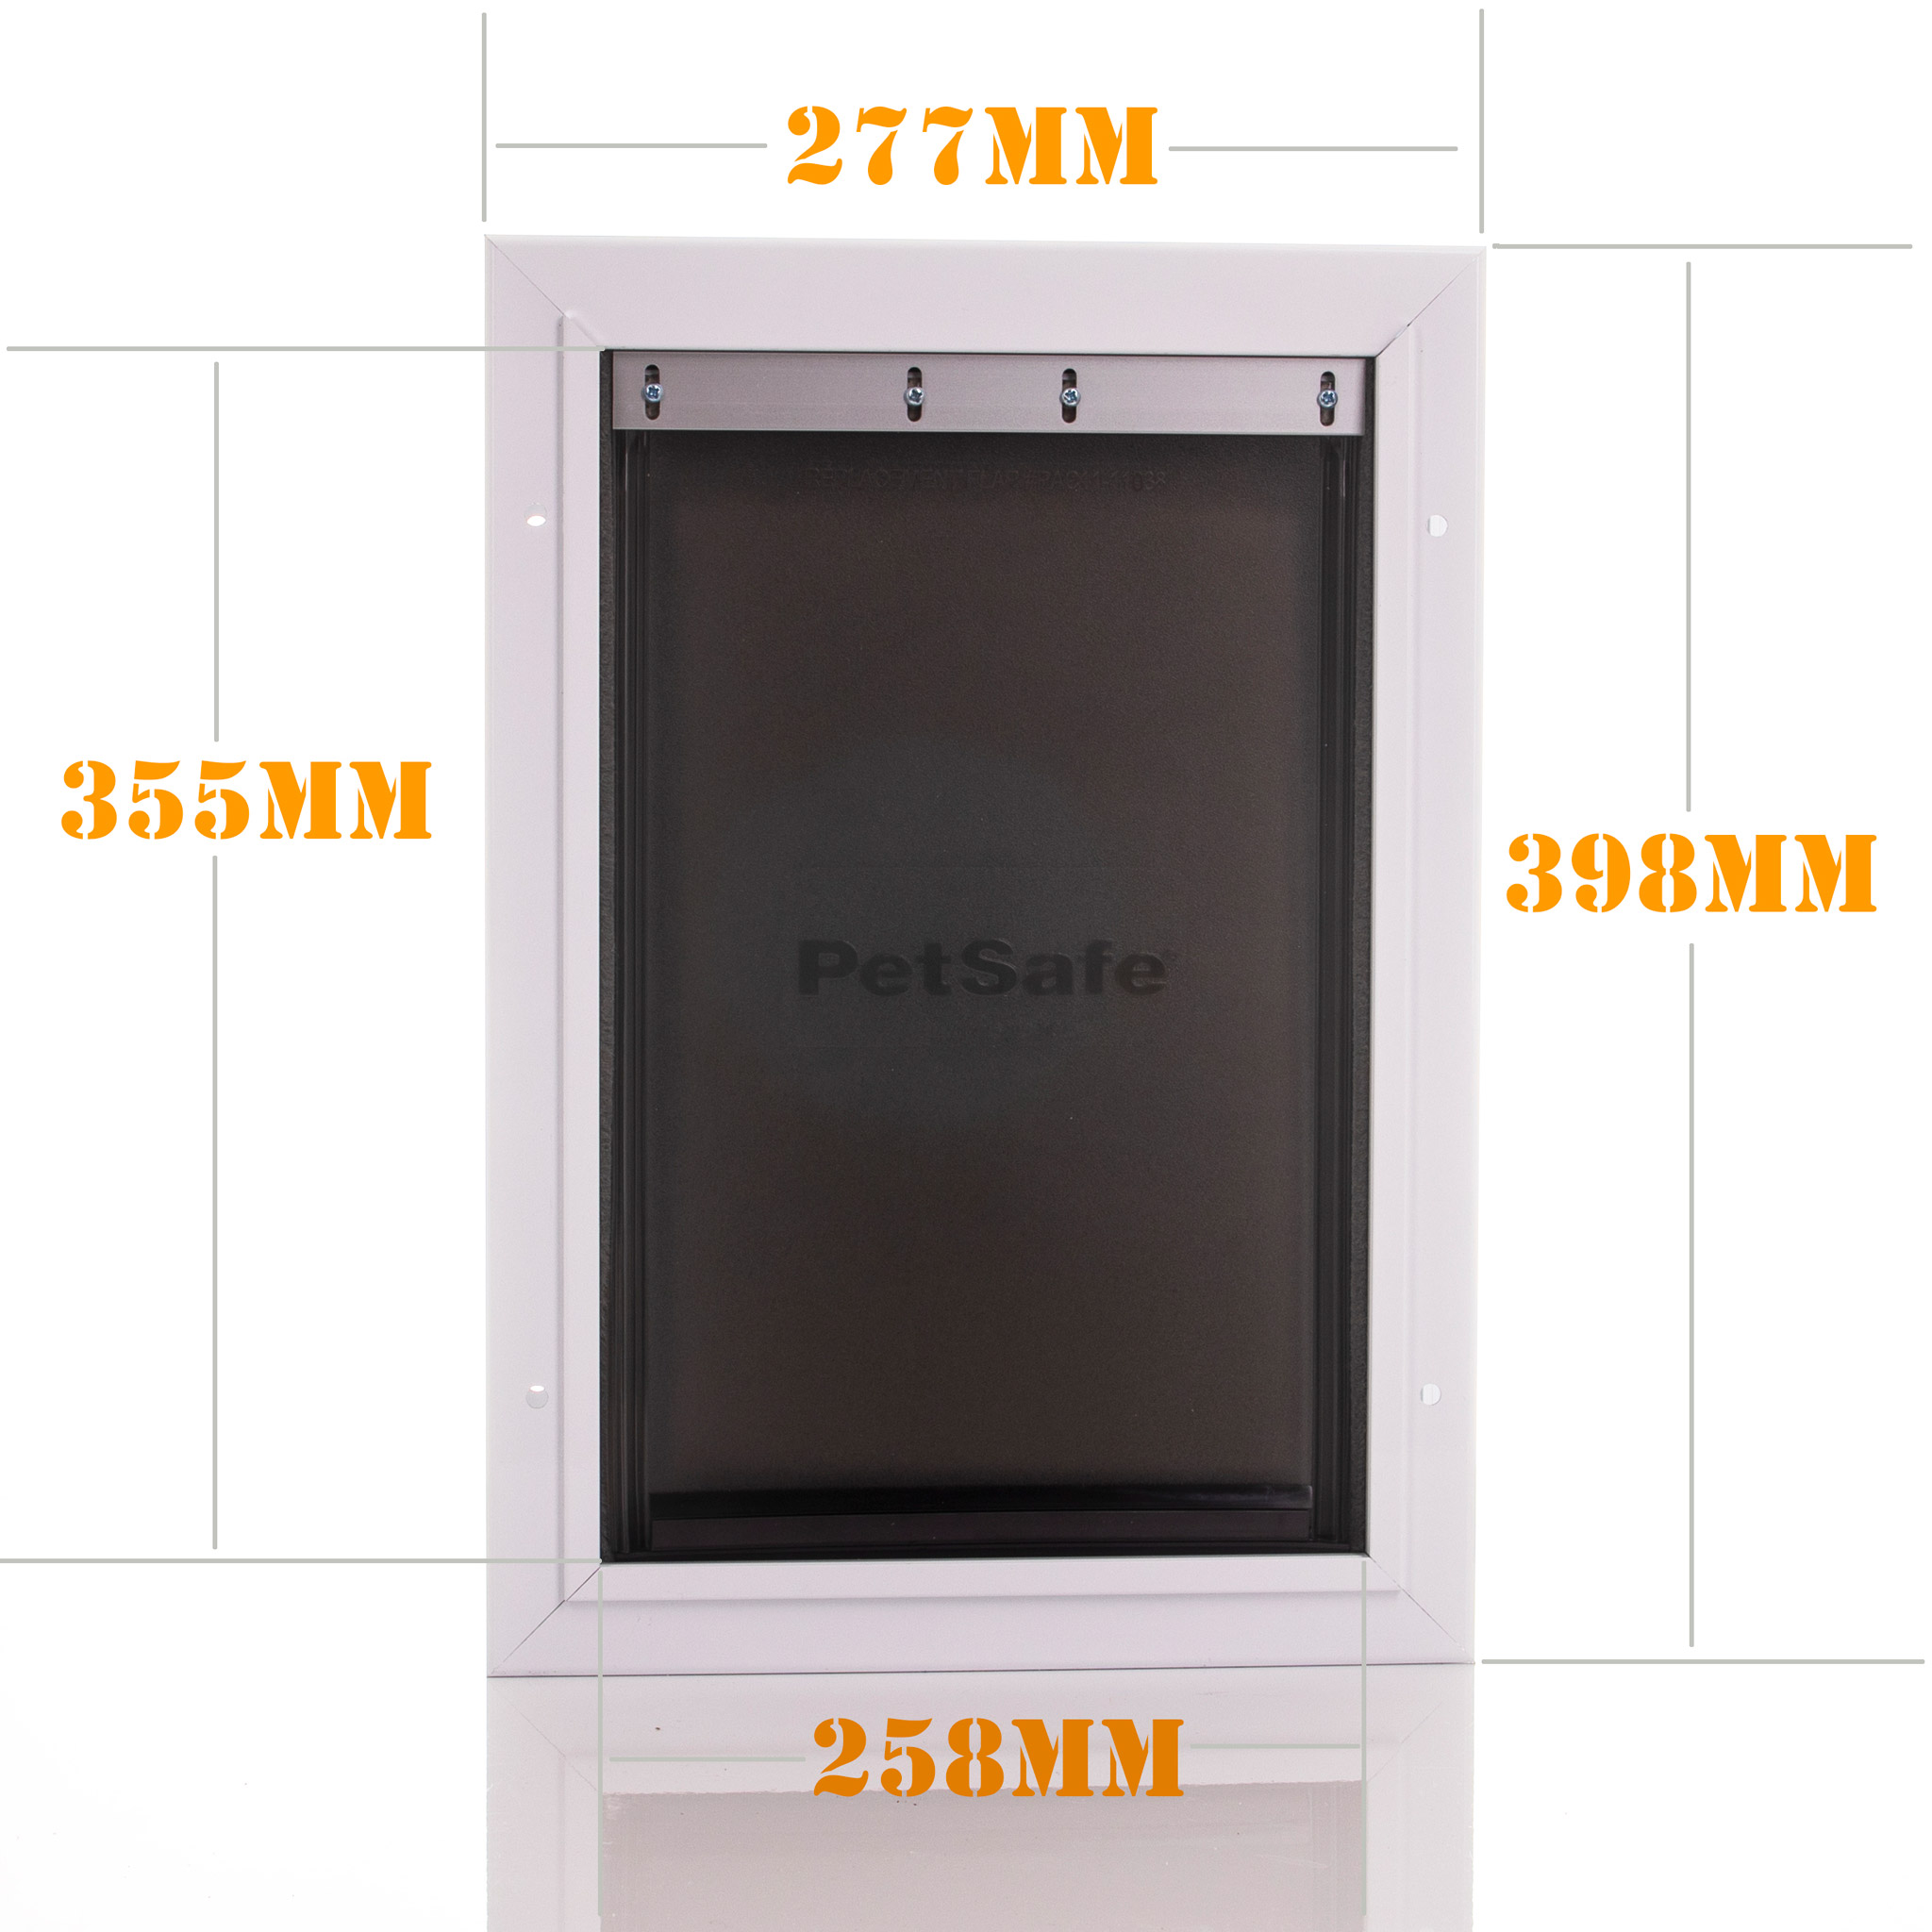 Outer frame size of the medium extreme weather door 277mm x 398mm